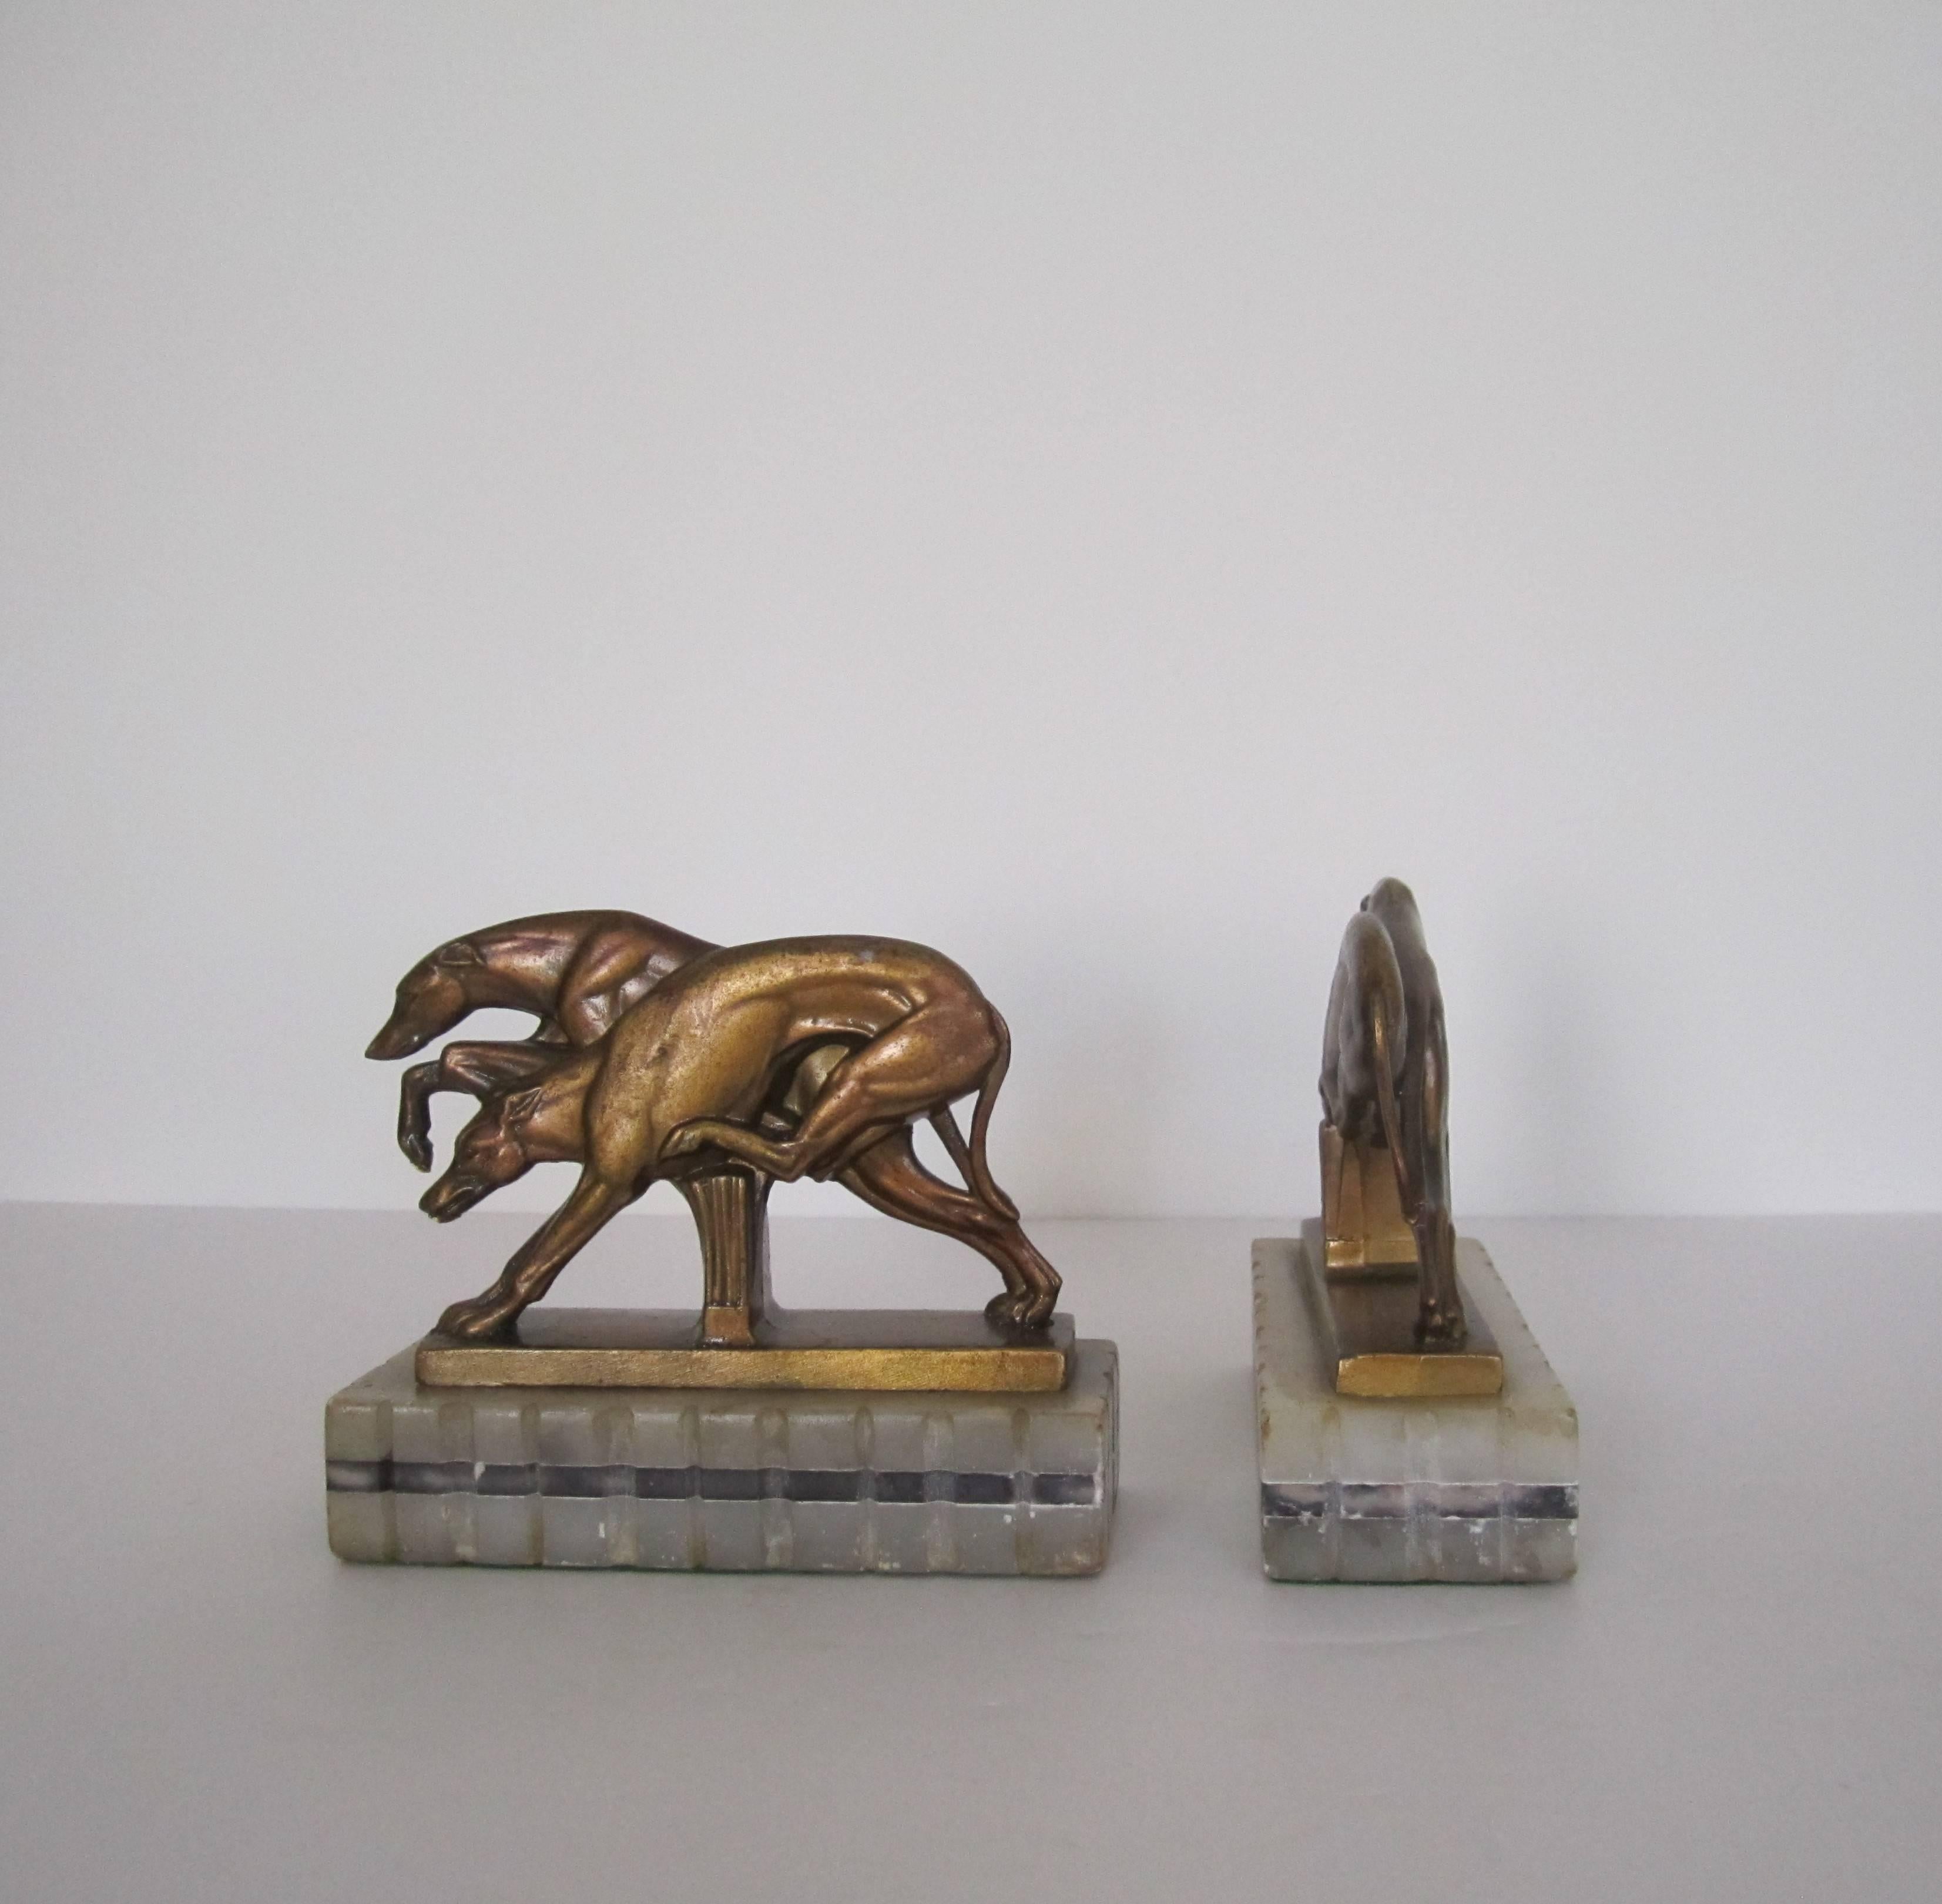 Vintage Art Deco Greyhound Dog Bookends on Black and White Marble Bases, 1920s 2